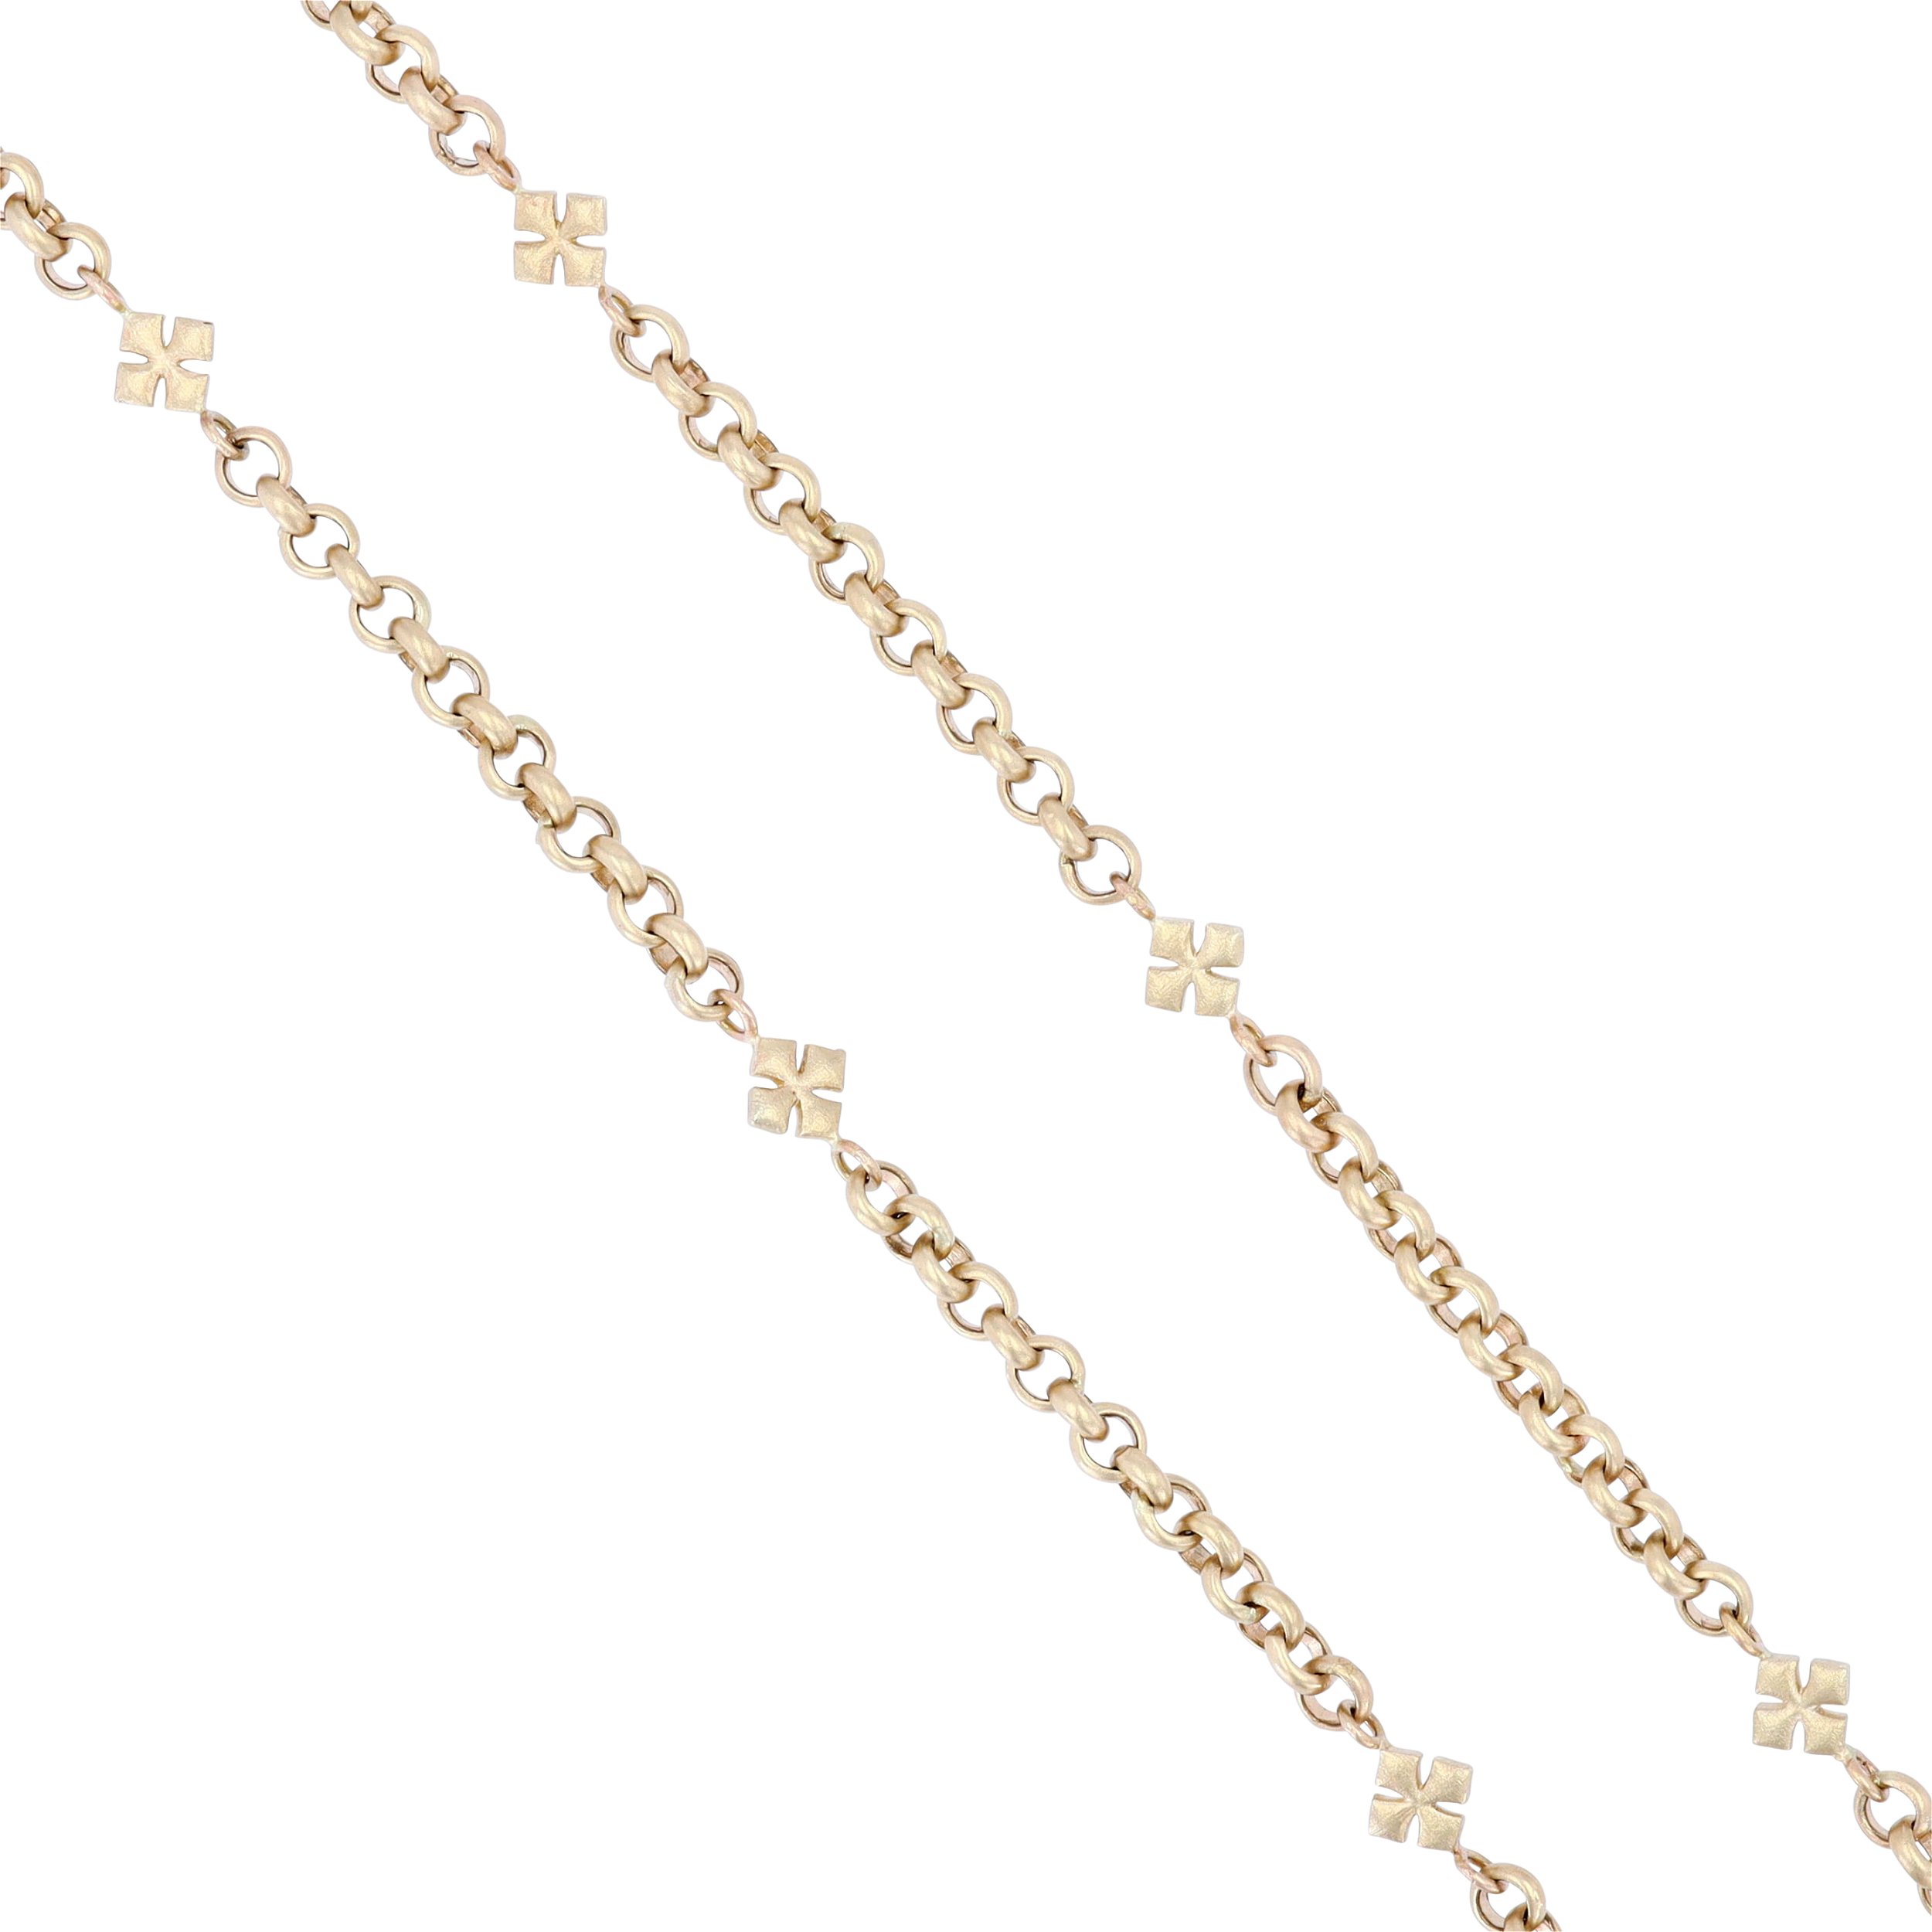 Solid Gold Rollo Chain with Cross Stations - 16" Length